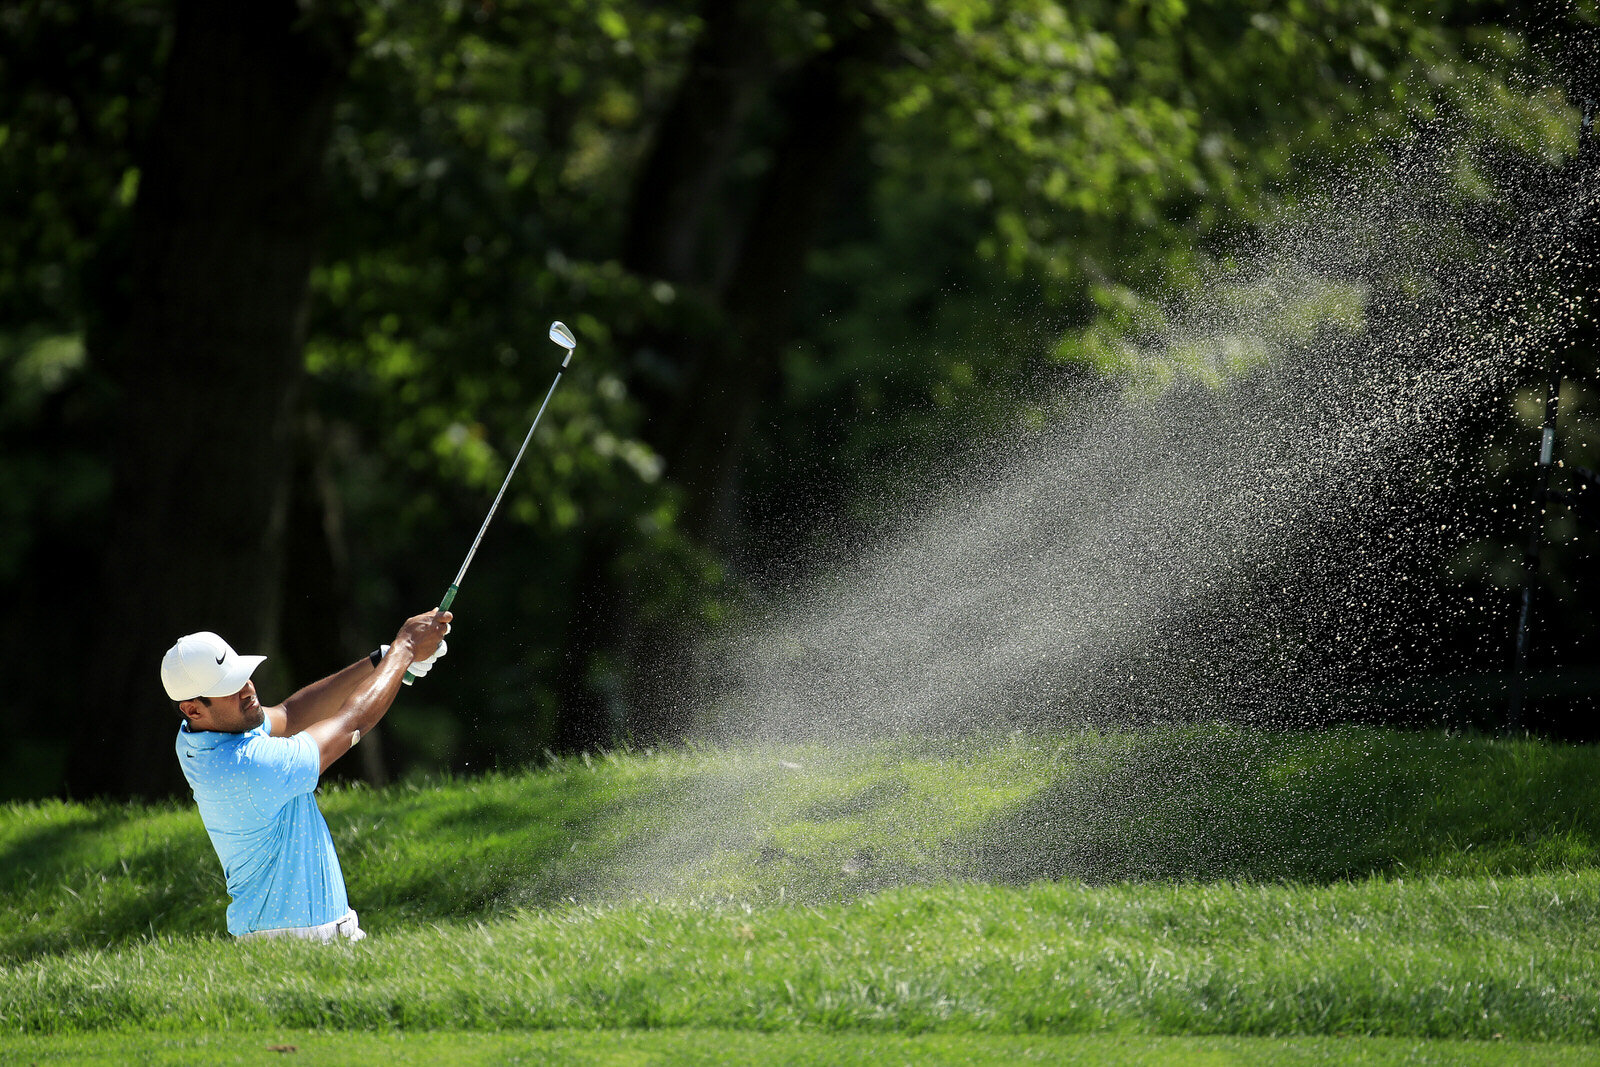  OLYMPIA FIELDS, ILLINOIS - AUGUST 27: Tony Finau of the United States plays a second shot from a bunker on the 12th hole during the first round of the BMW Championship on the North Course at Olympia Fields Country Club on August 27, 2020 in Olympia 